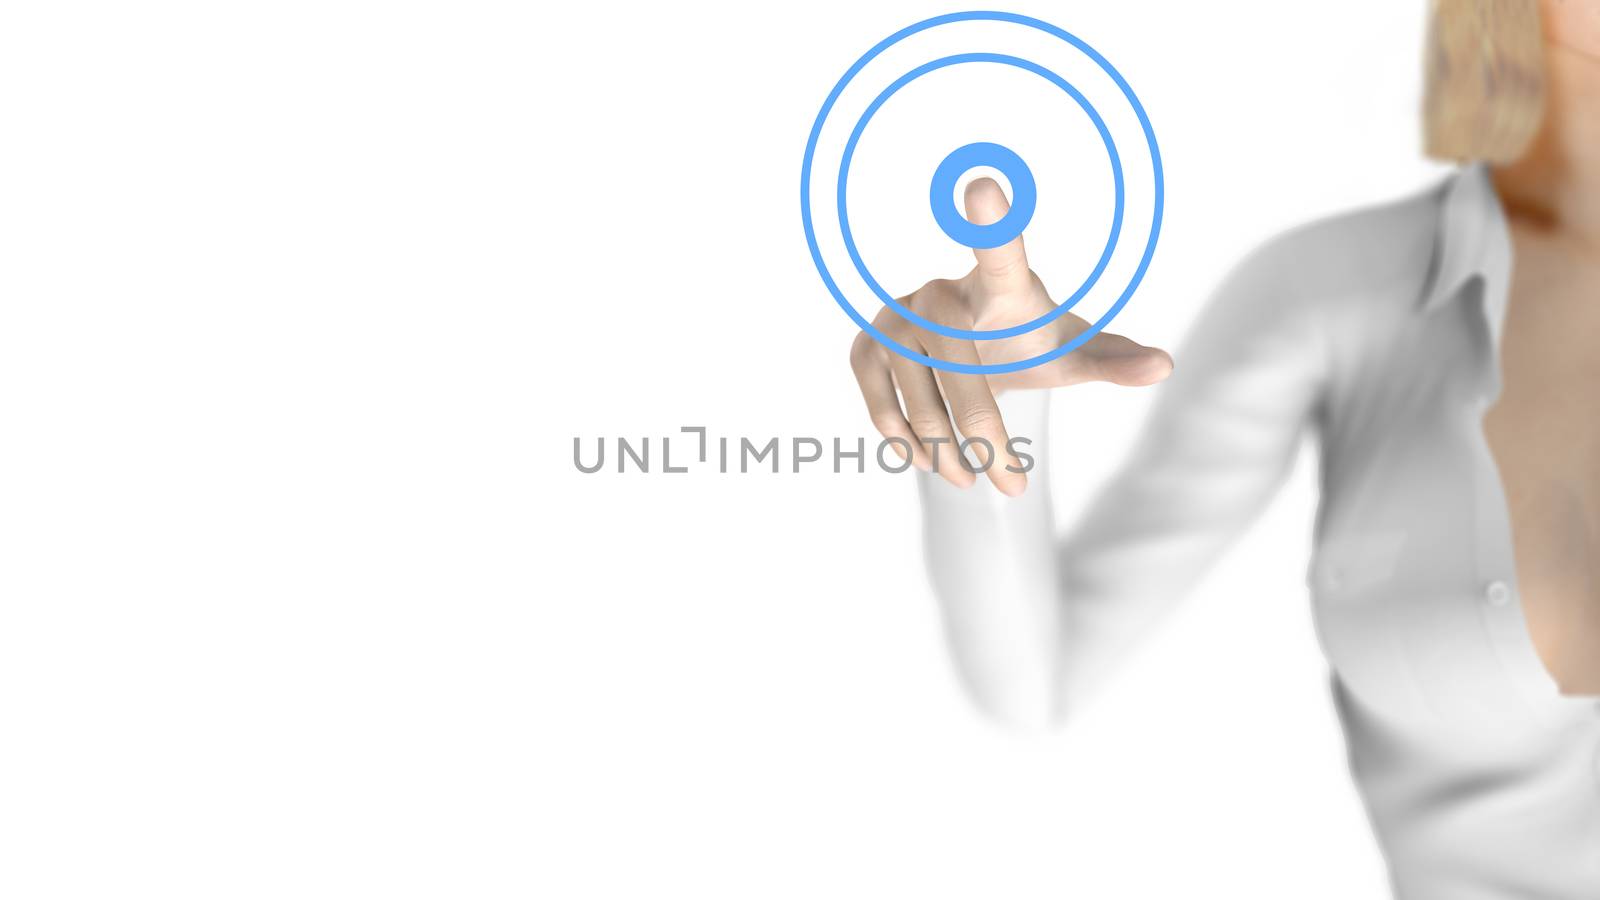 Sexy business woman touching a virtual screen. Free blank space available. The woman is blurred behind the transparent screen. A ripple effect is displayed.